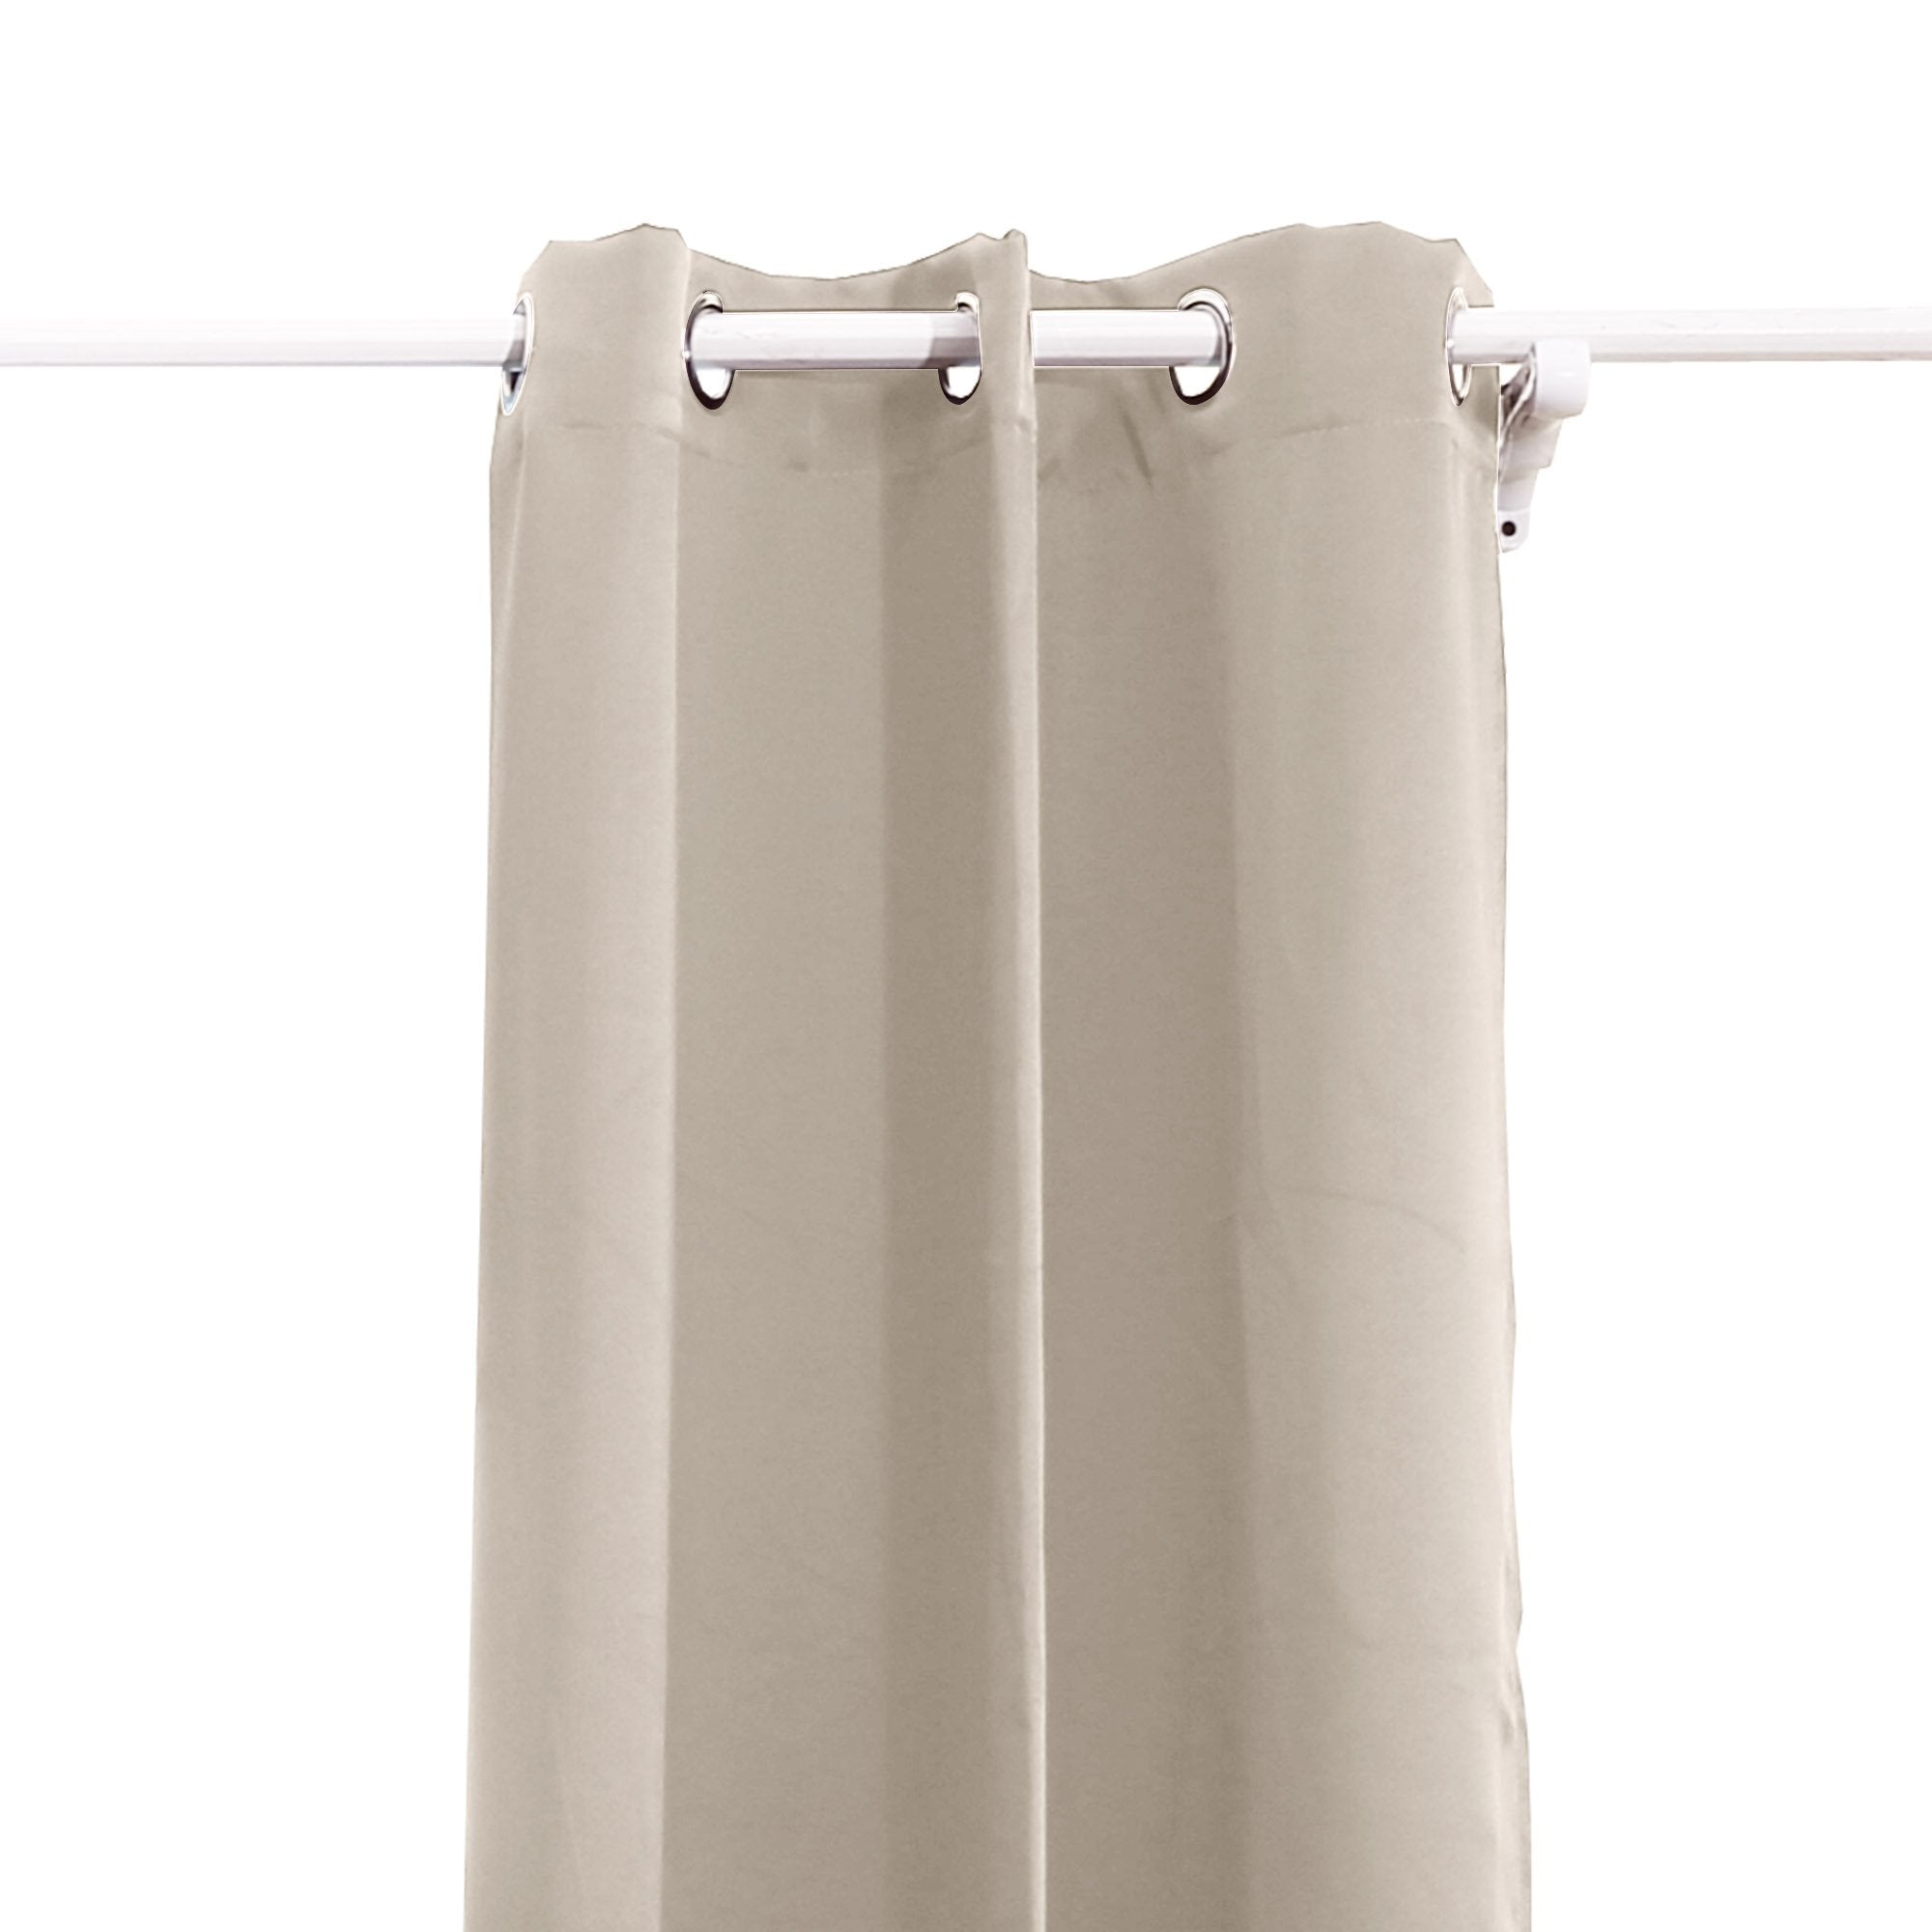 living room 3 Layers Eyelet Blockout Curtains140x230cm Beige